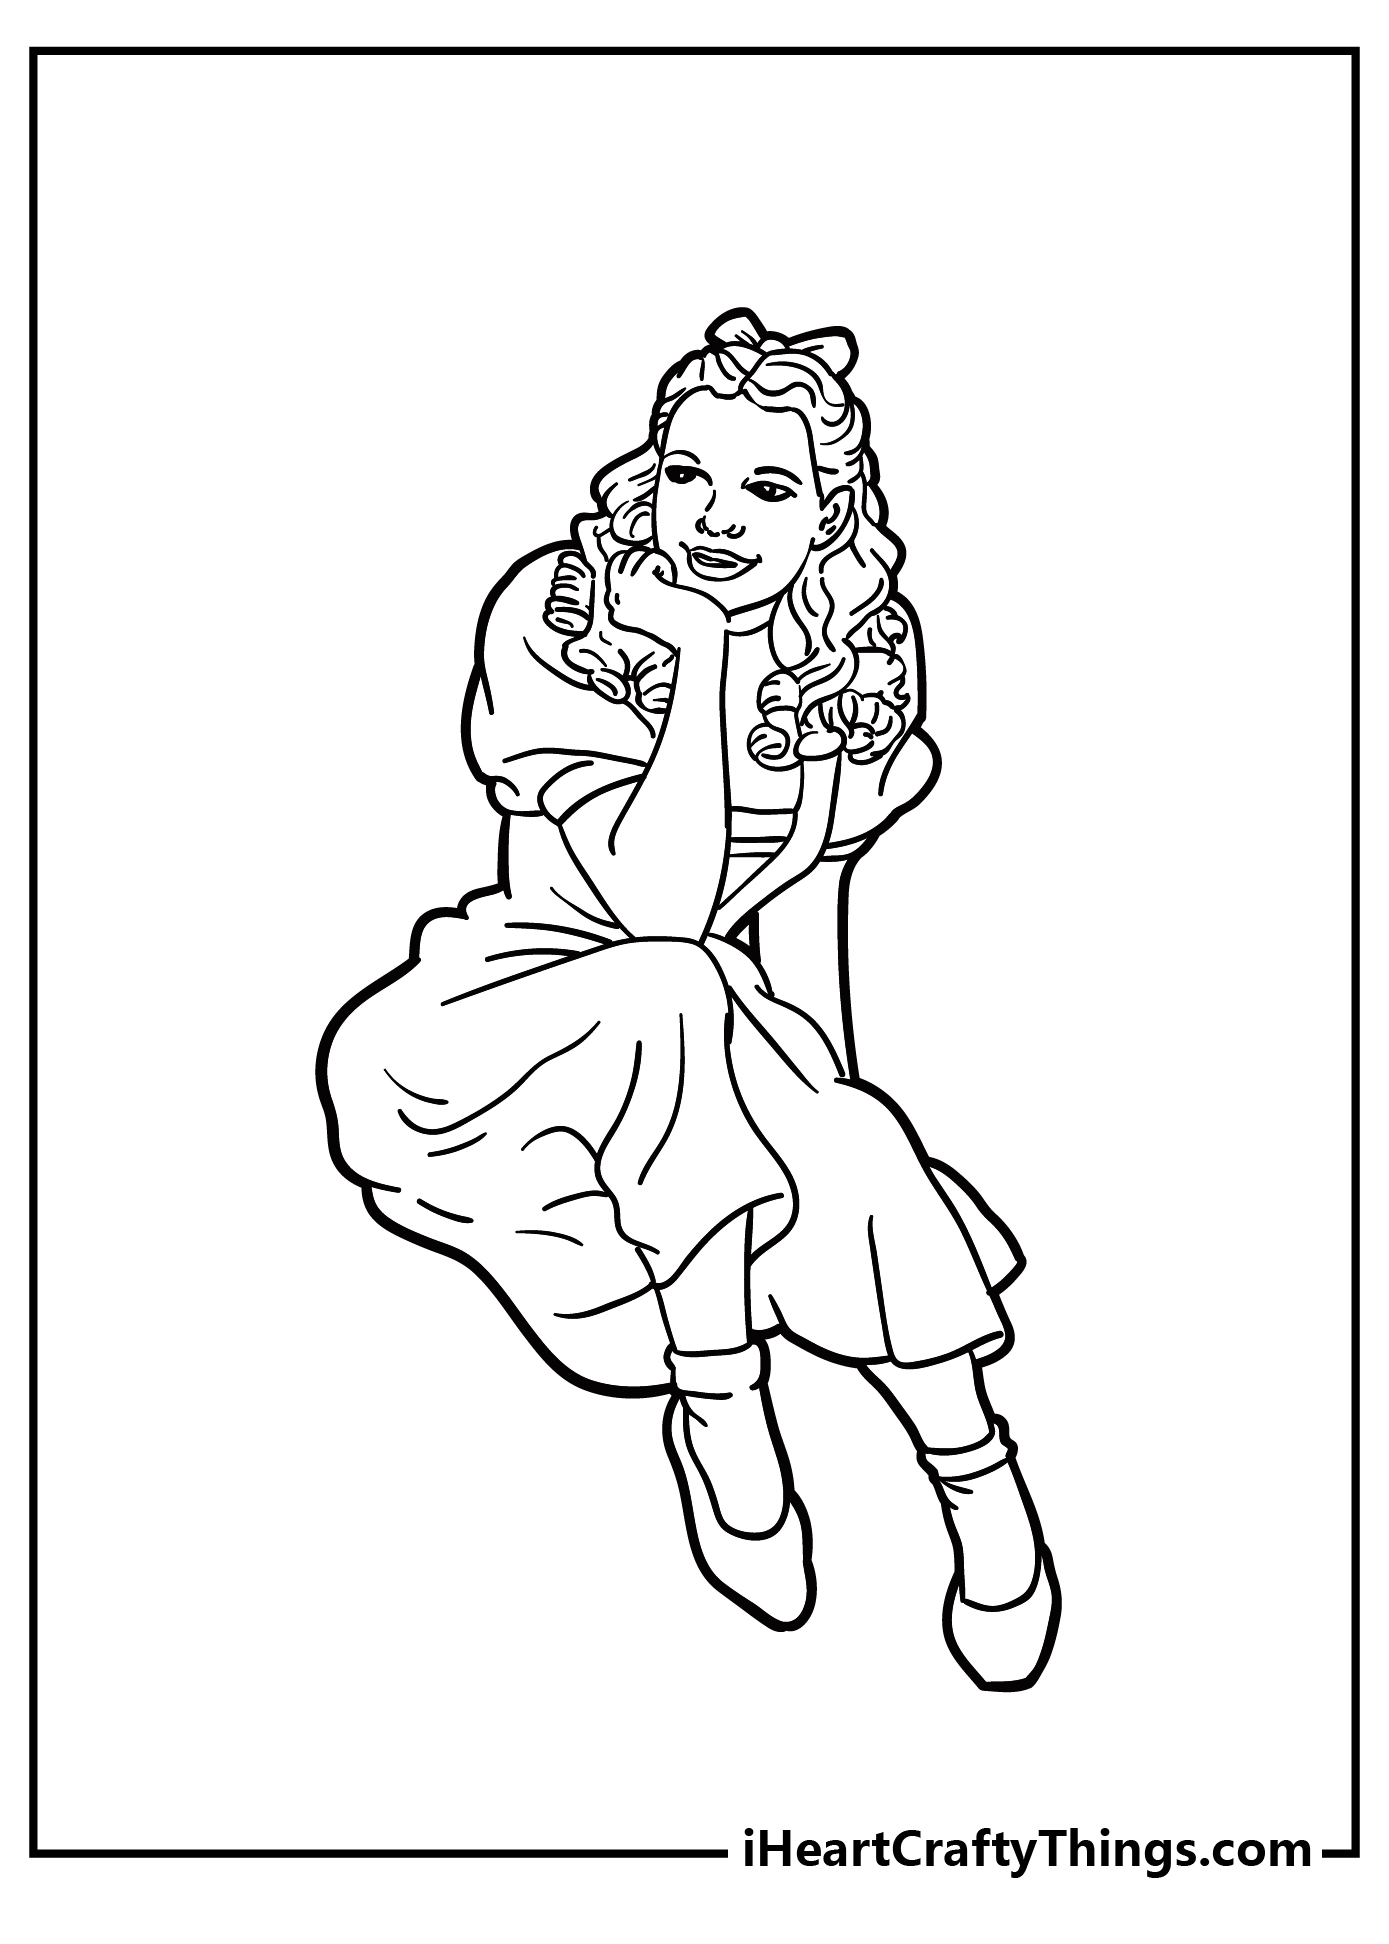 Wizard Of Oz Coloring Sheet for children free download